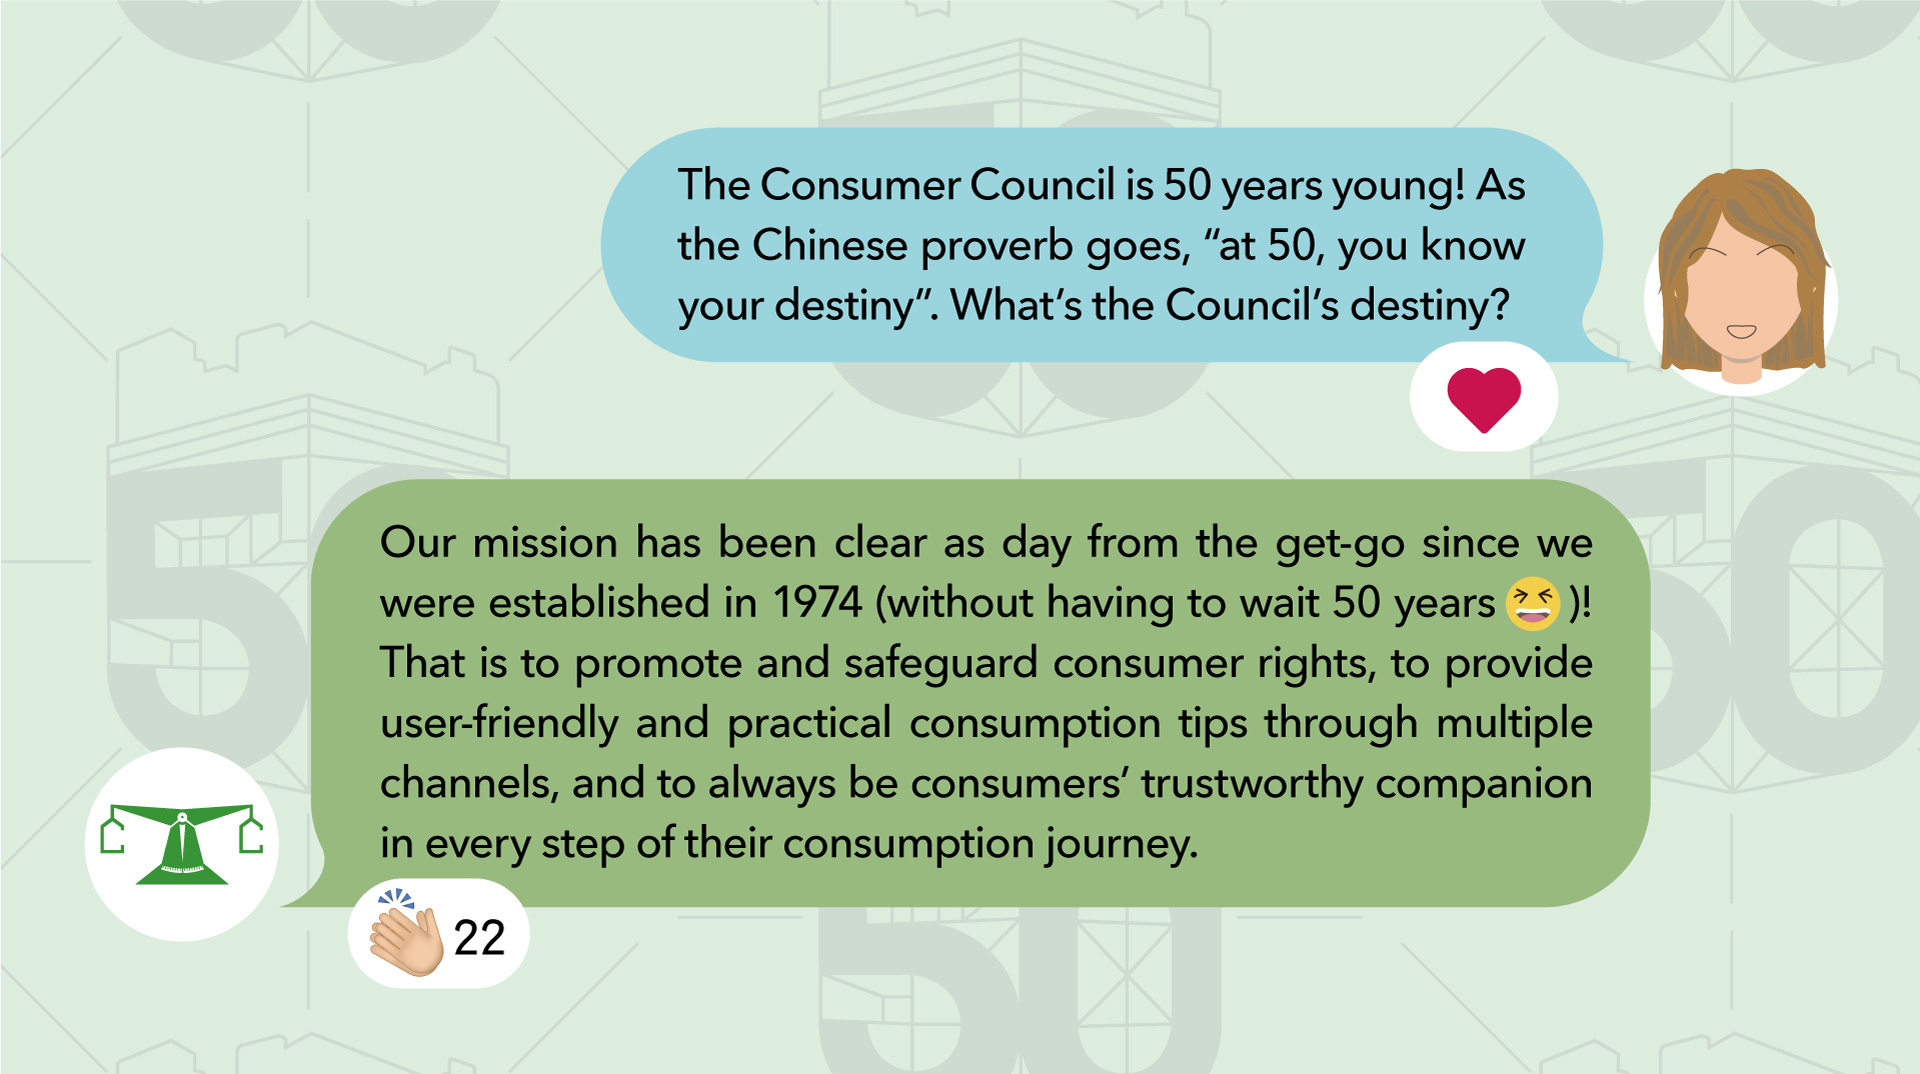 Consumer Council's Mission